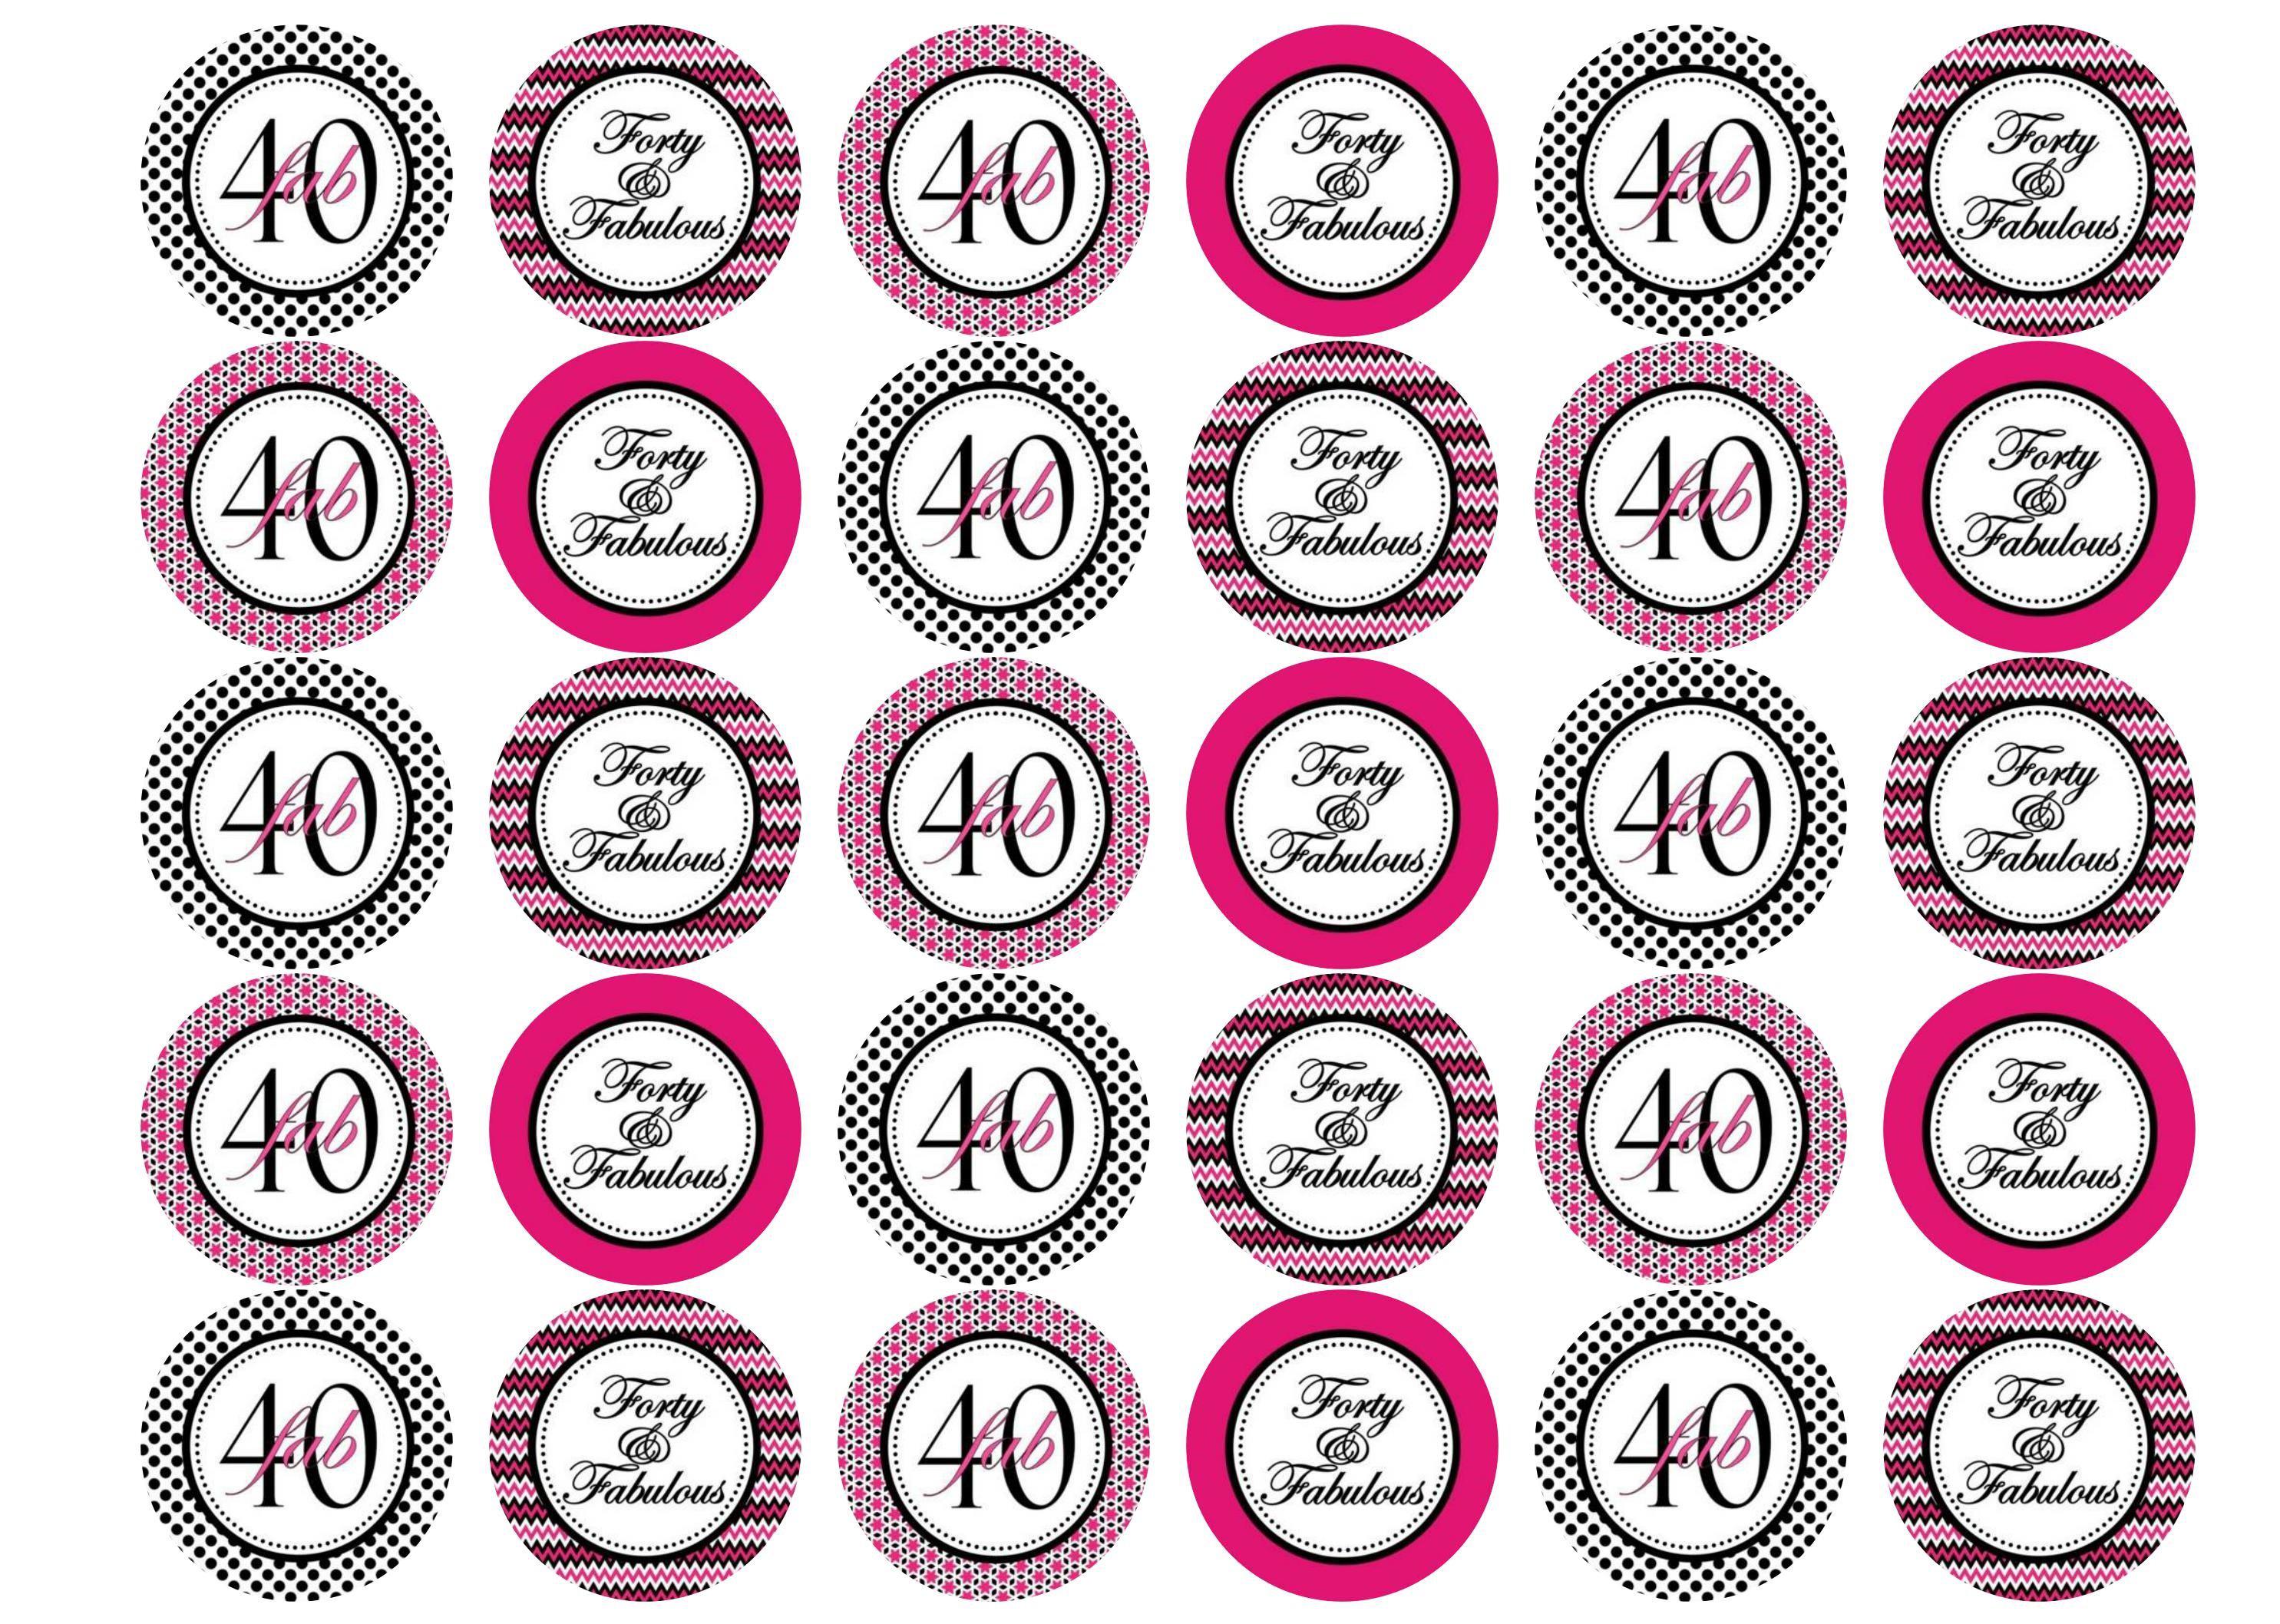 30 printed pink and black cupcake toppers for a fortieth birthday